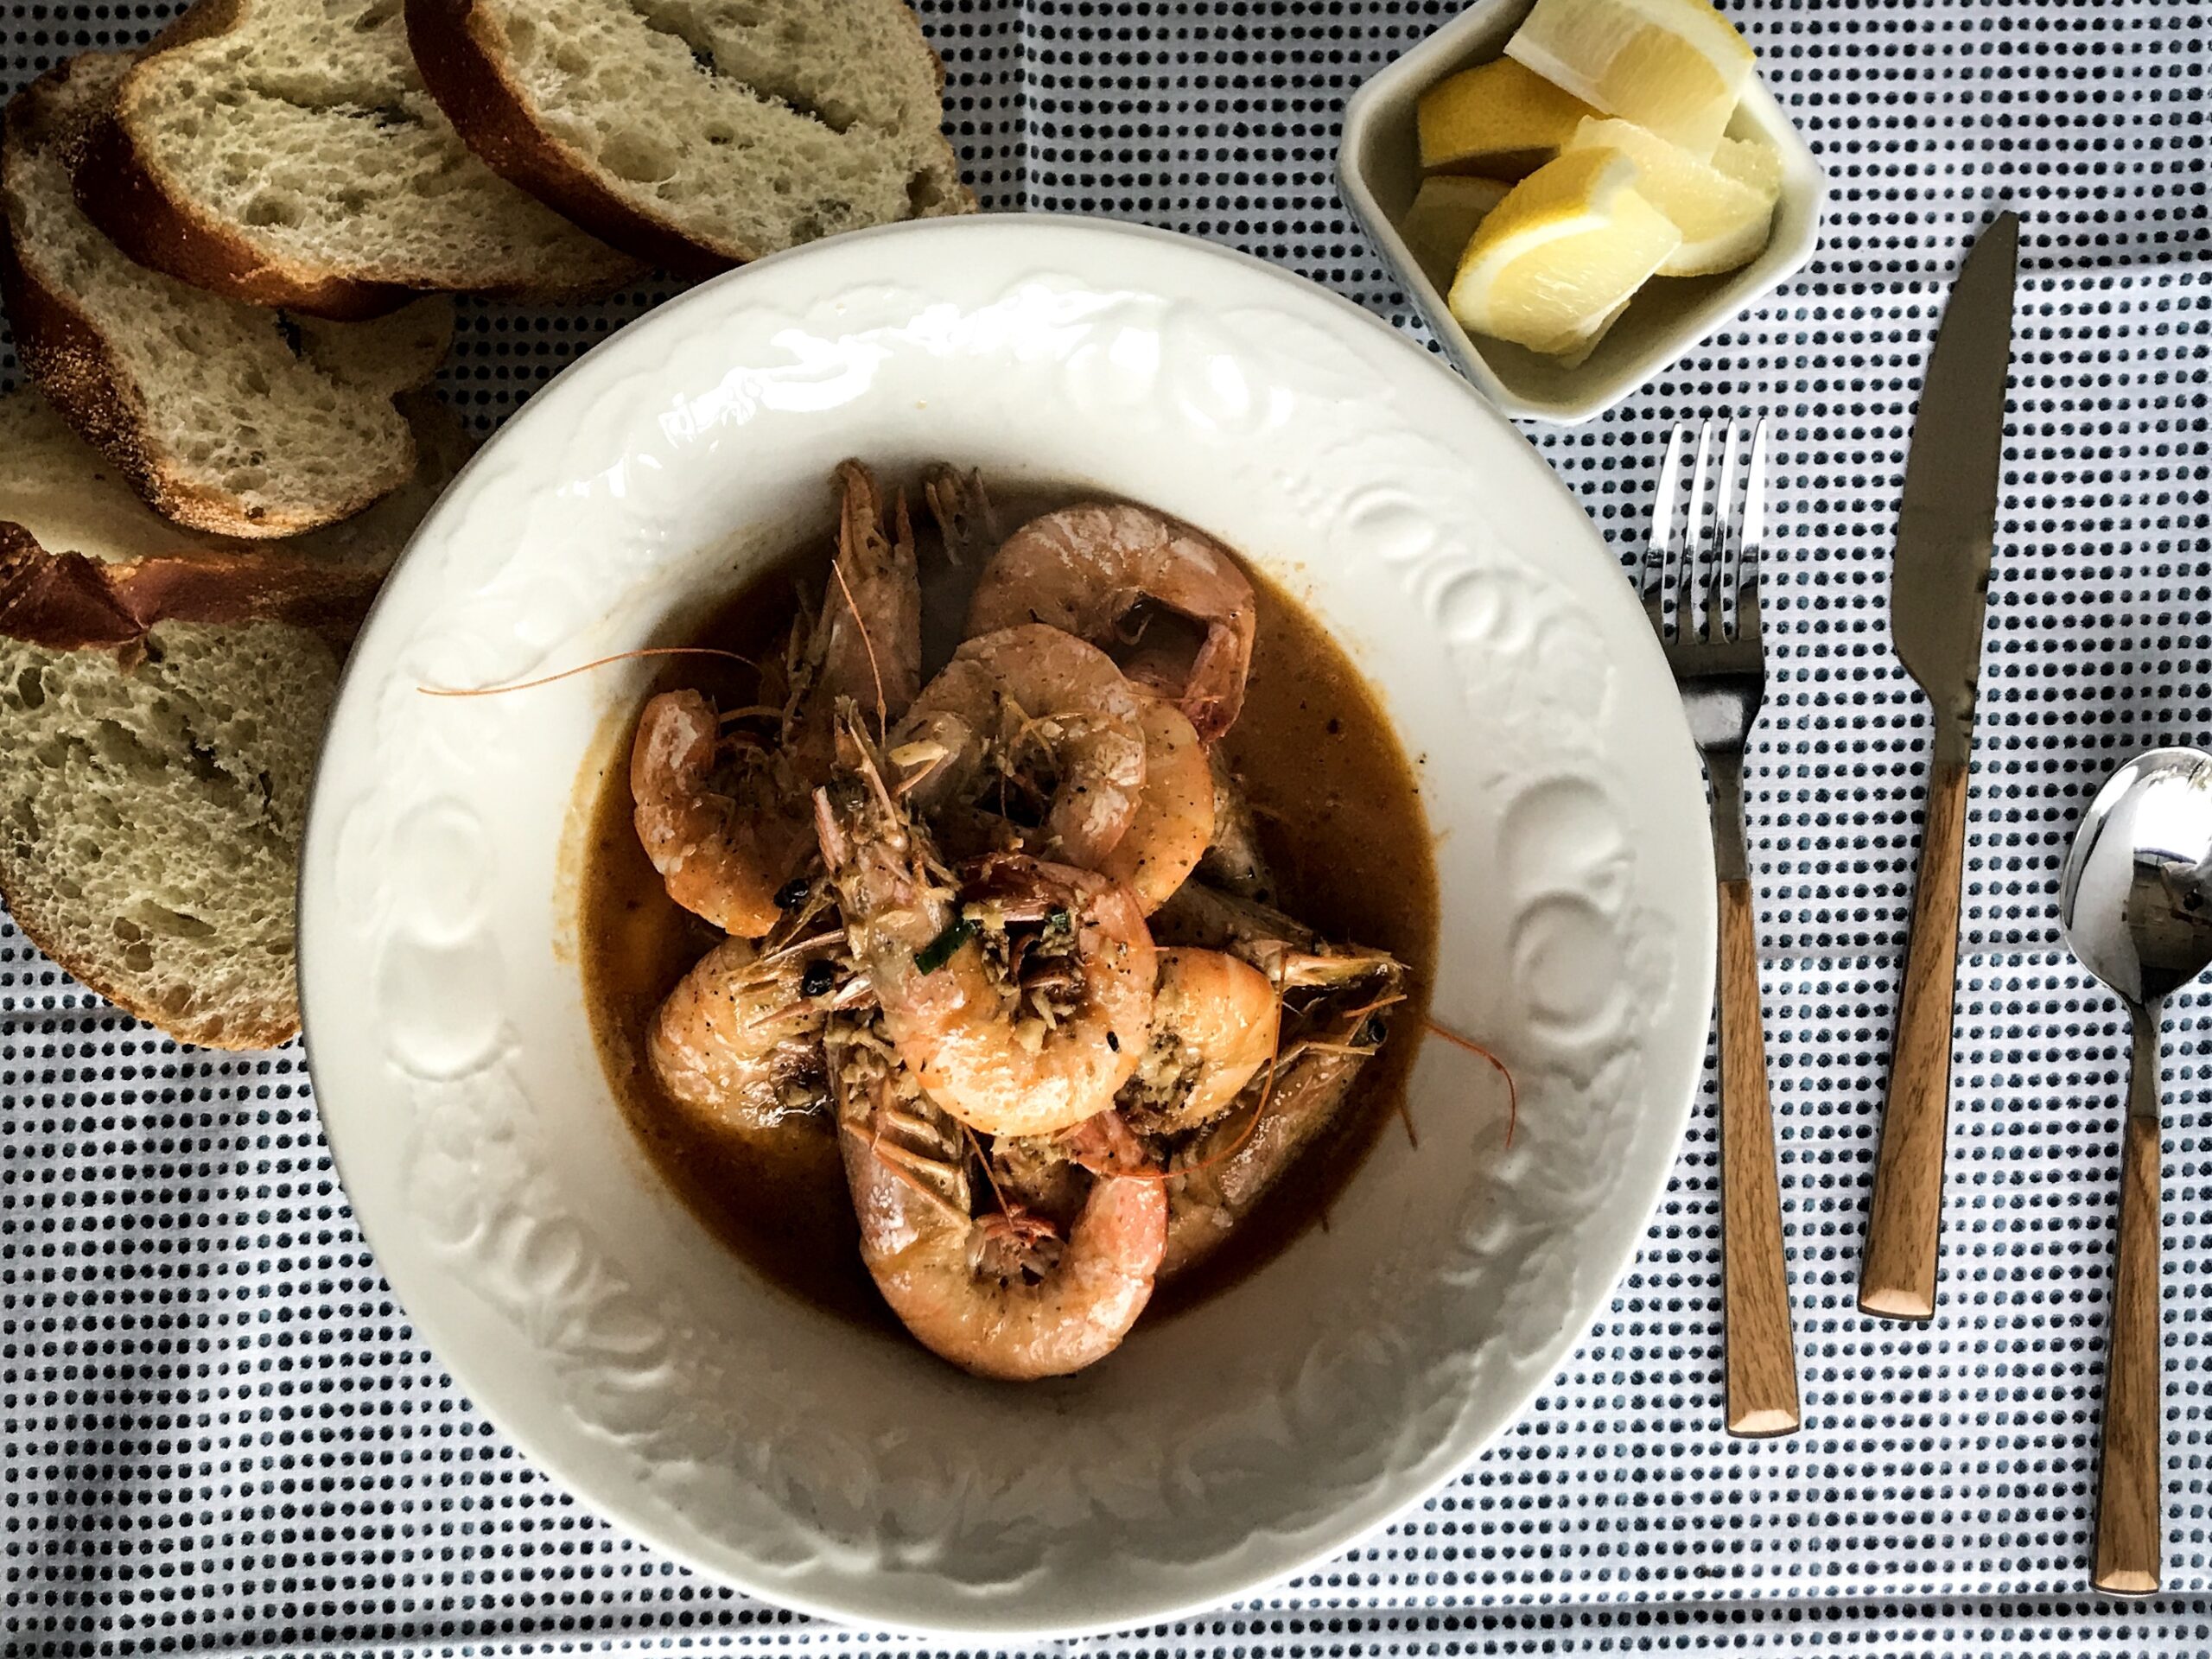 a plate with barbeque shrimp, some lemon slices and bread